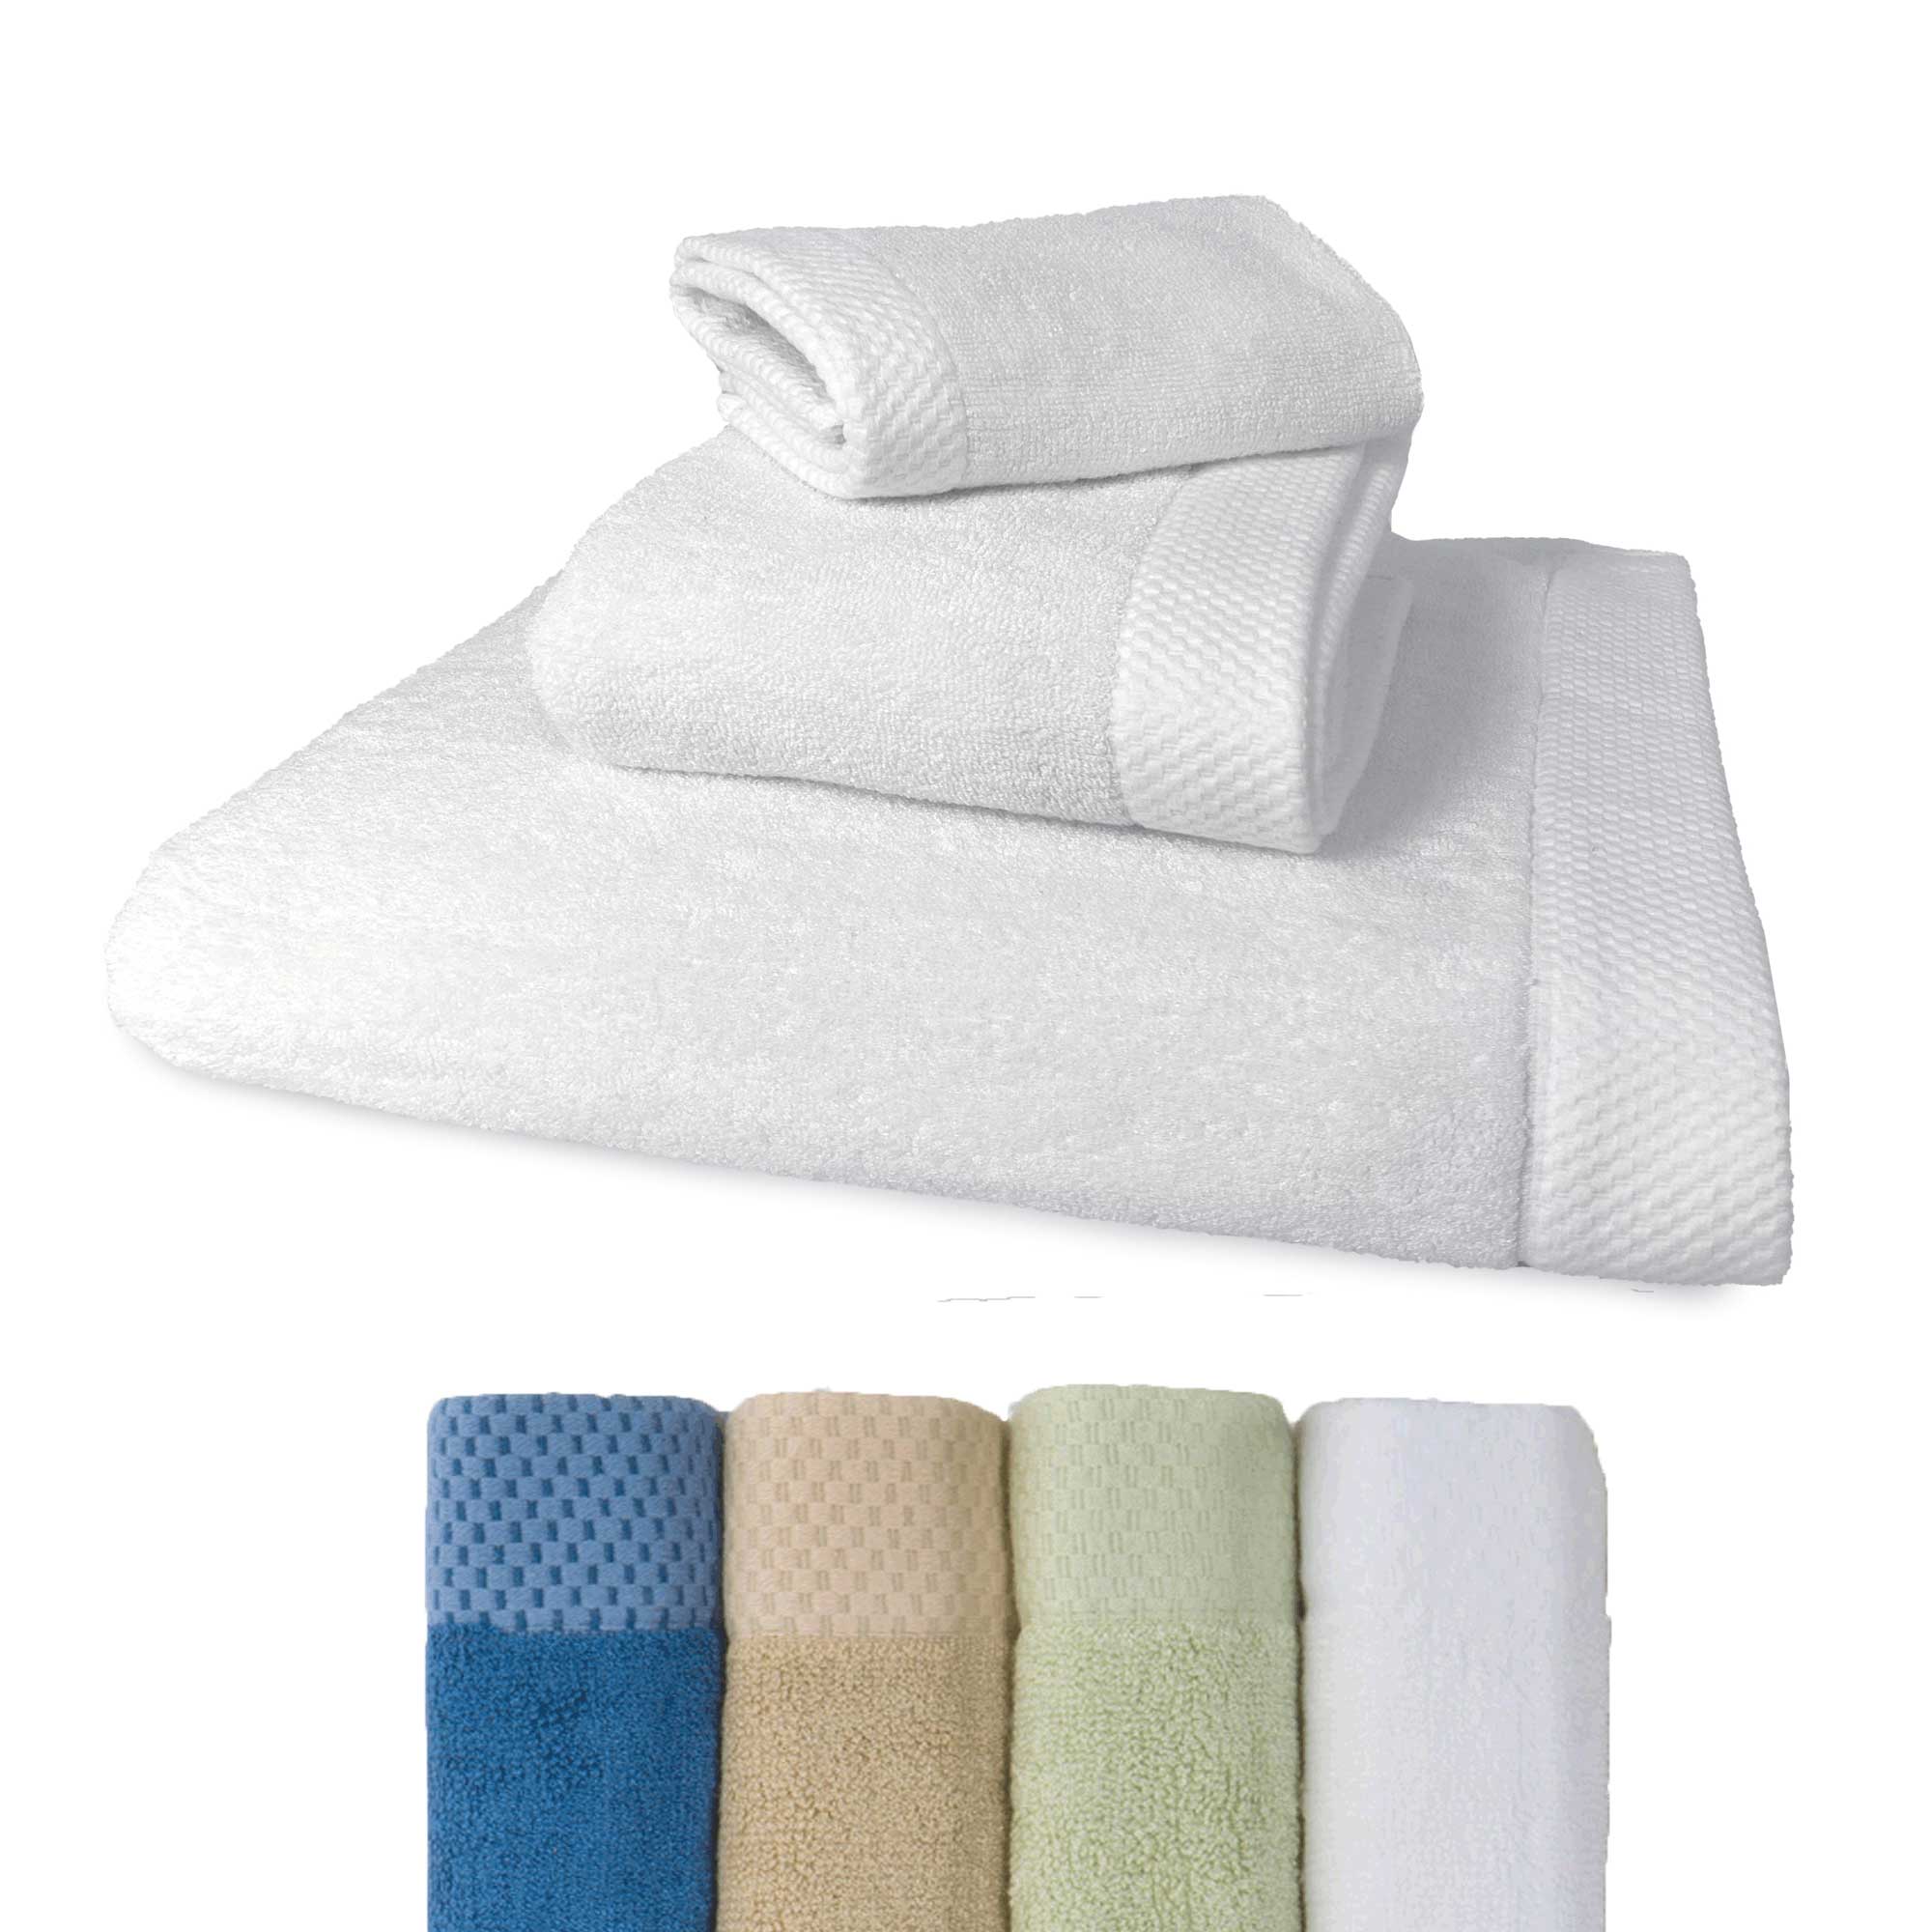 Luxury BAMBOO Towel Set 3Pcs - Extra Gentle, Dry Off Quickly, Spa-Quality Softness Bath Towels -  Champagne